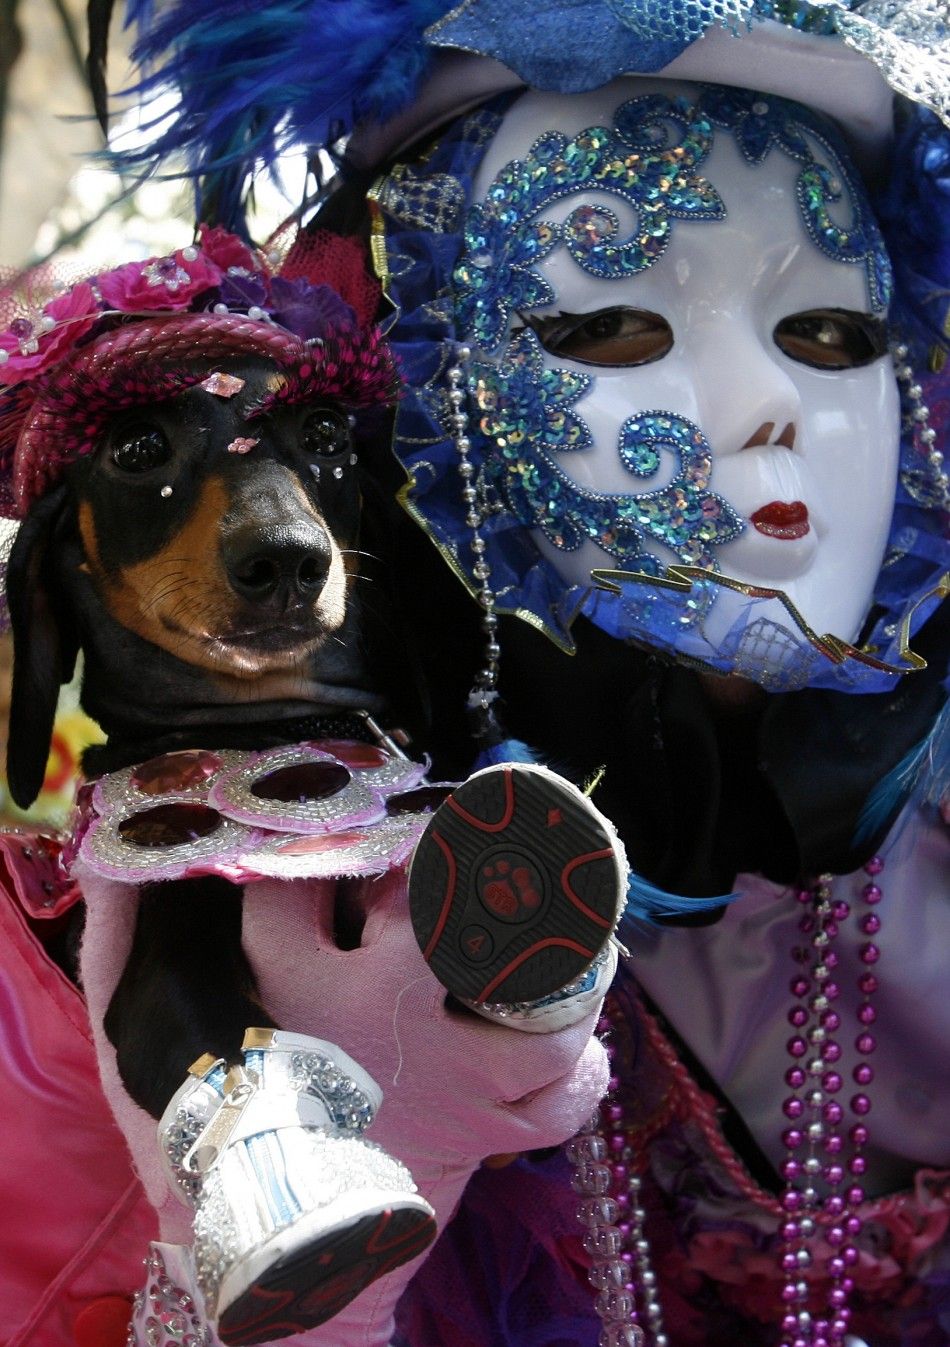 A Dutch hound is carried by her owner as they model their costumes during the quotScaredy Cats and Dogsquot Halloween fund-raising event at a mall in Quezon City, Metro Manila, October 23, 2011.